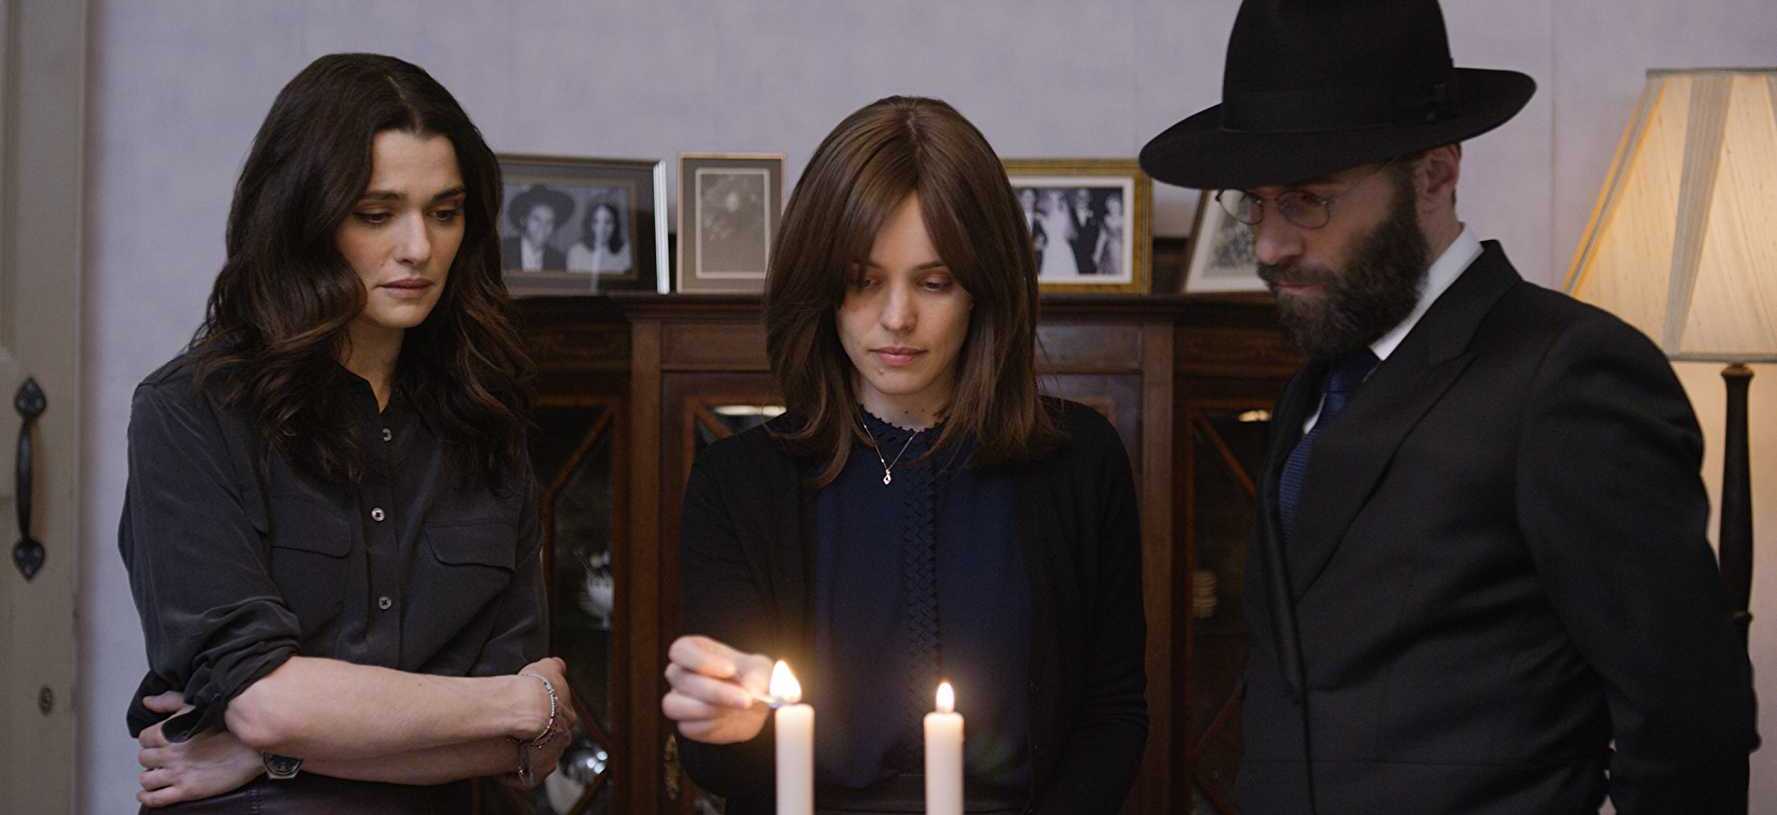 Disobedience (2017 film) other cast